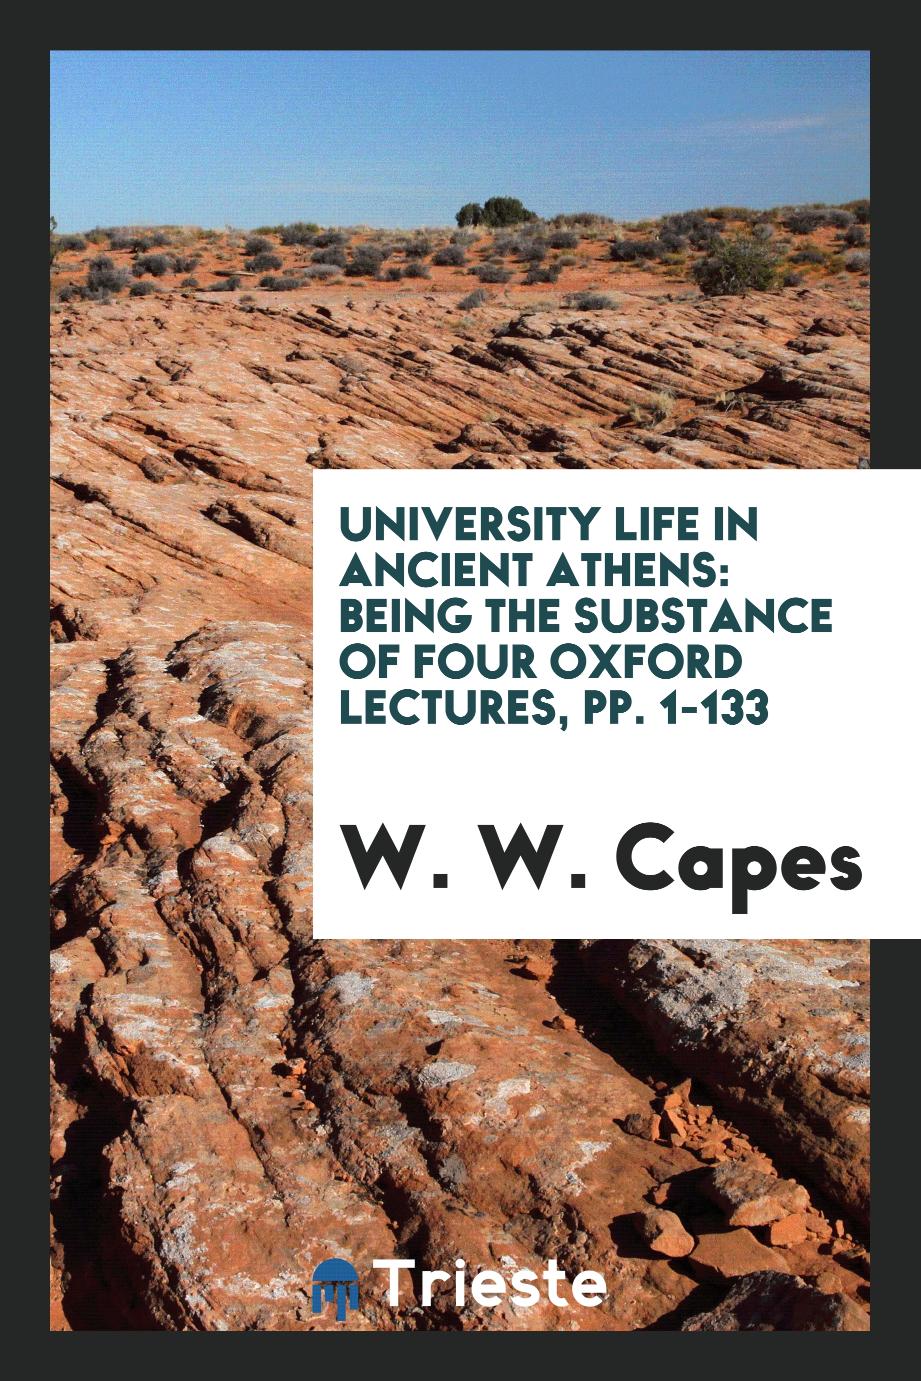 University Life in Ancient Athens: Being the Substance of Four Oxford Lectures, pp. 1-133